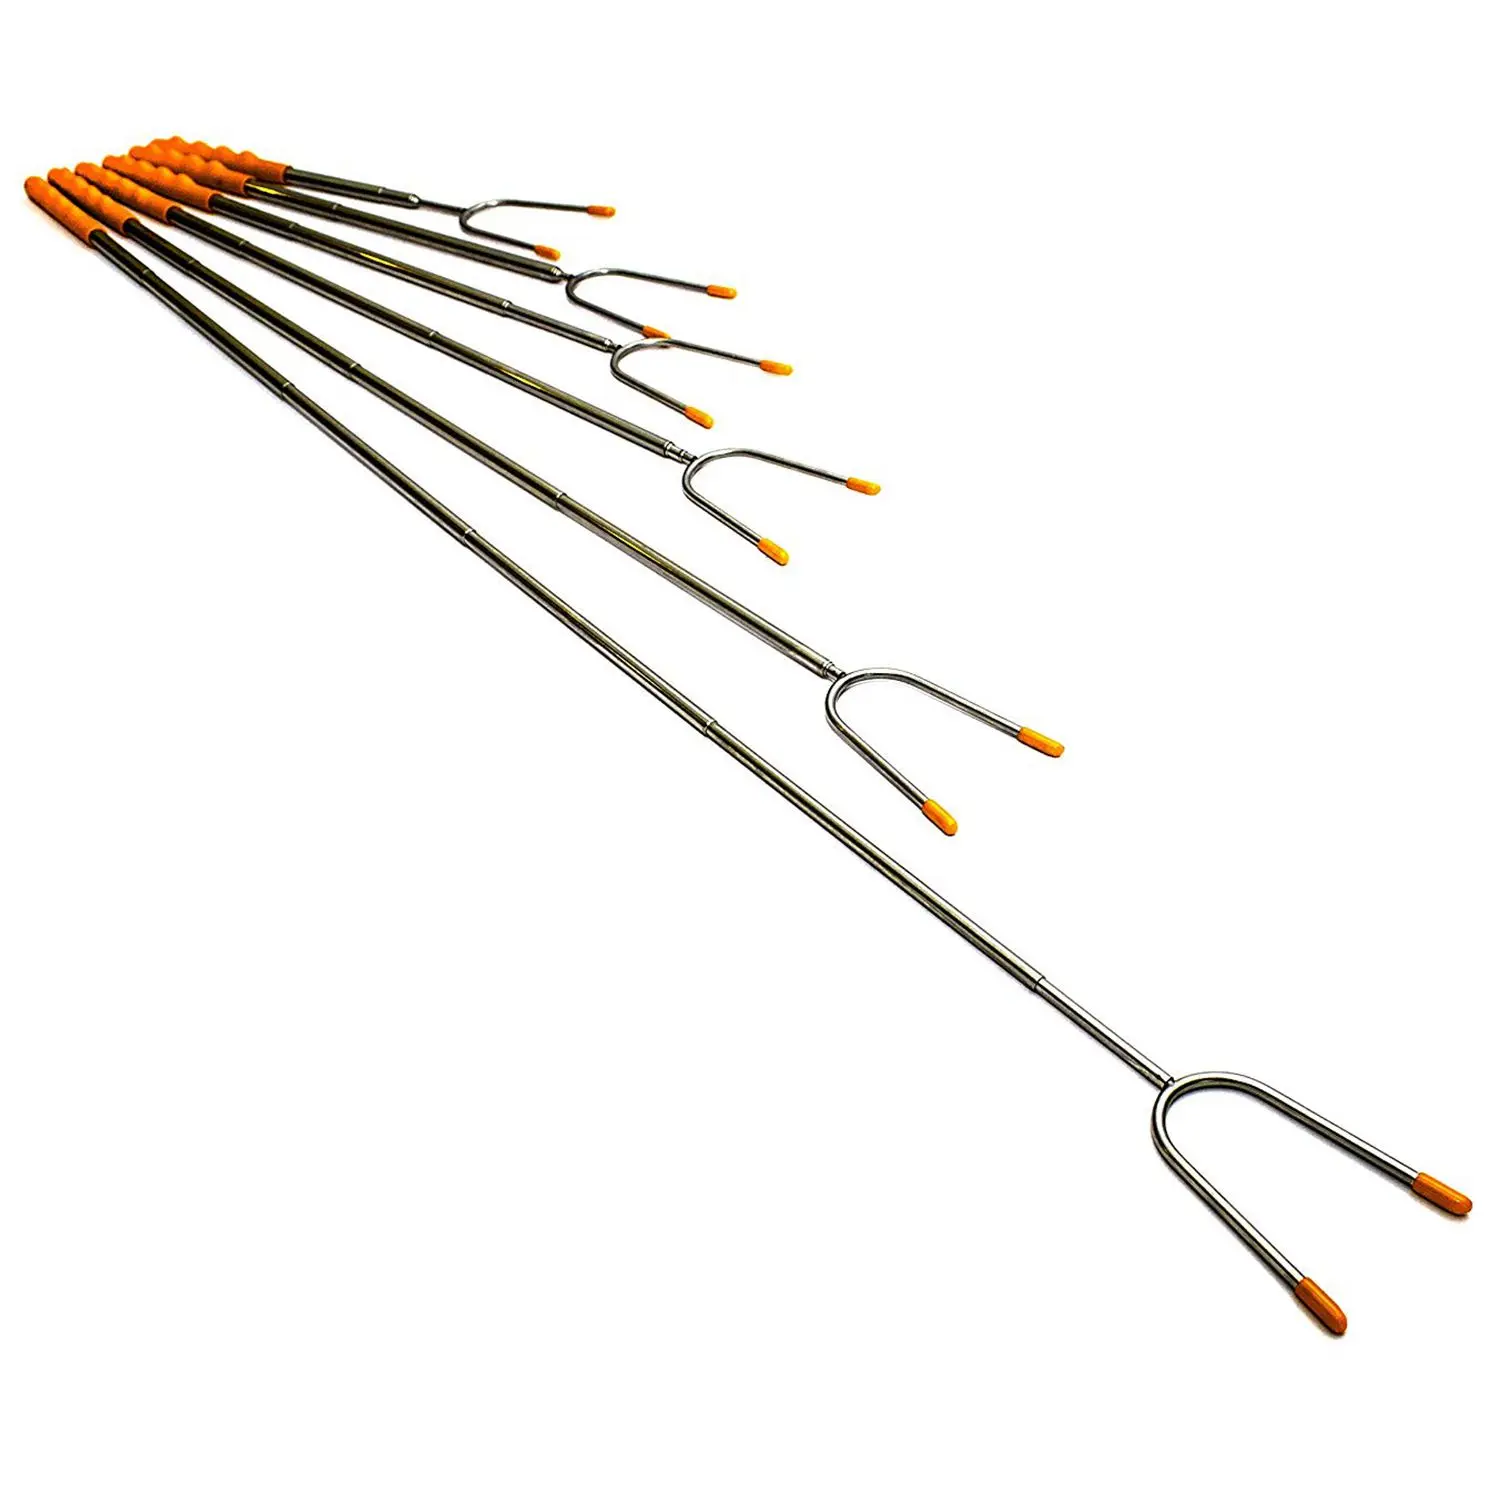 Fashion 6 Premium Marshmallow Roasting Sticks 45 Inches Extra Long Extendable Stainless Steel Skewers Telescoping BBQ Forks fo